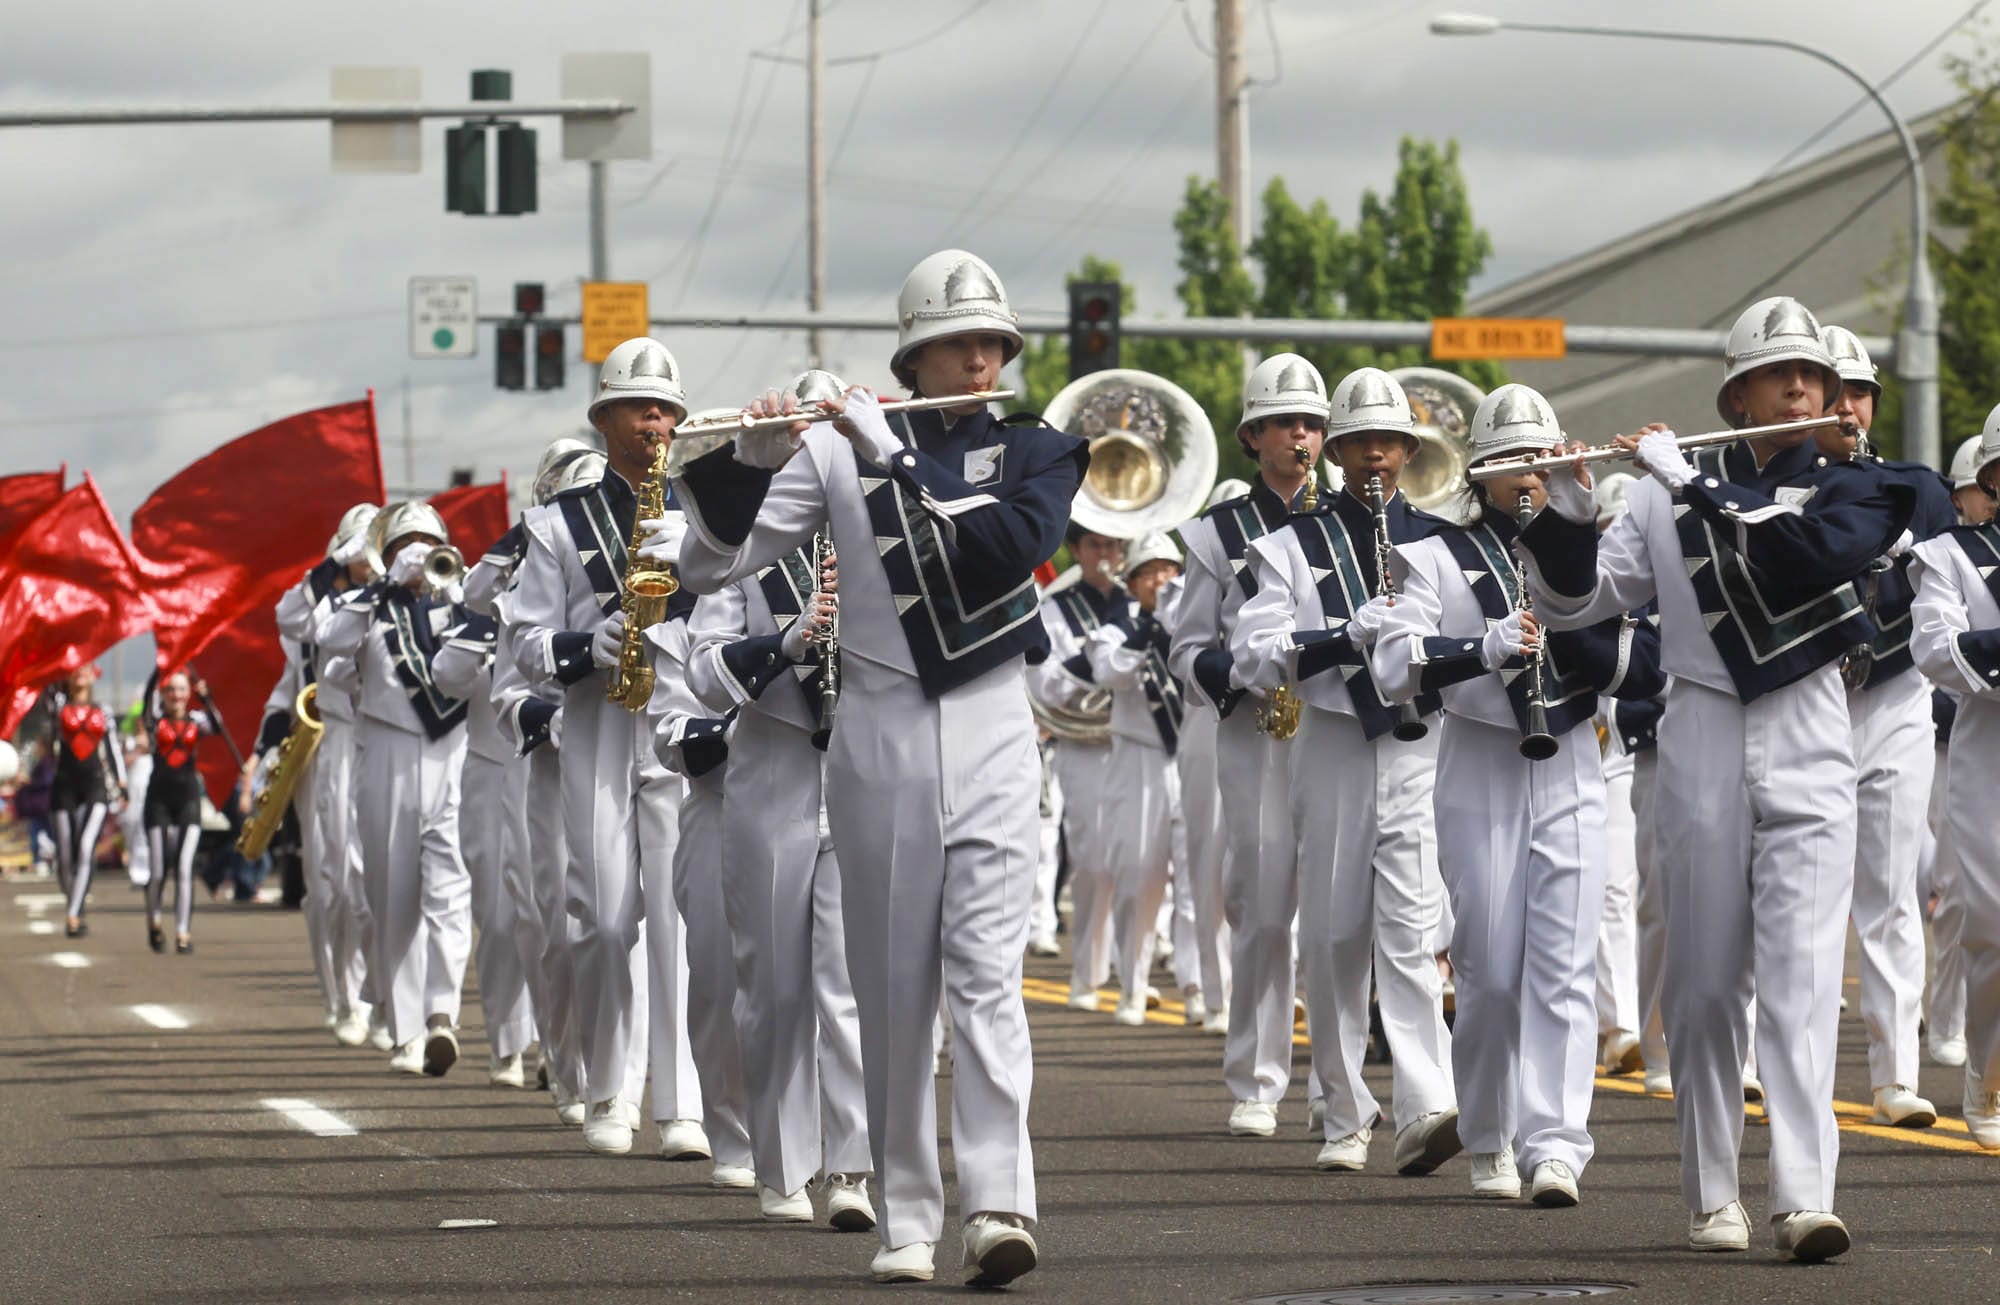 The marching band from Skyview High School performs Saturday in the 50th anniversary Hazel Dell Parade of Bands.